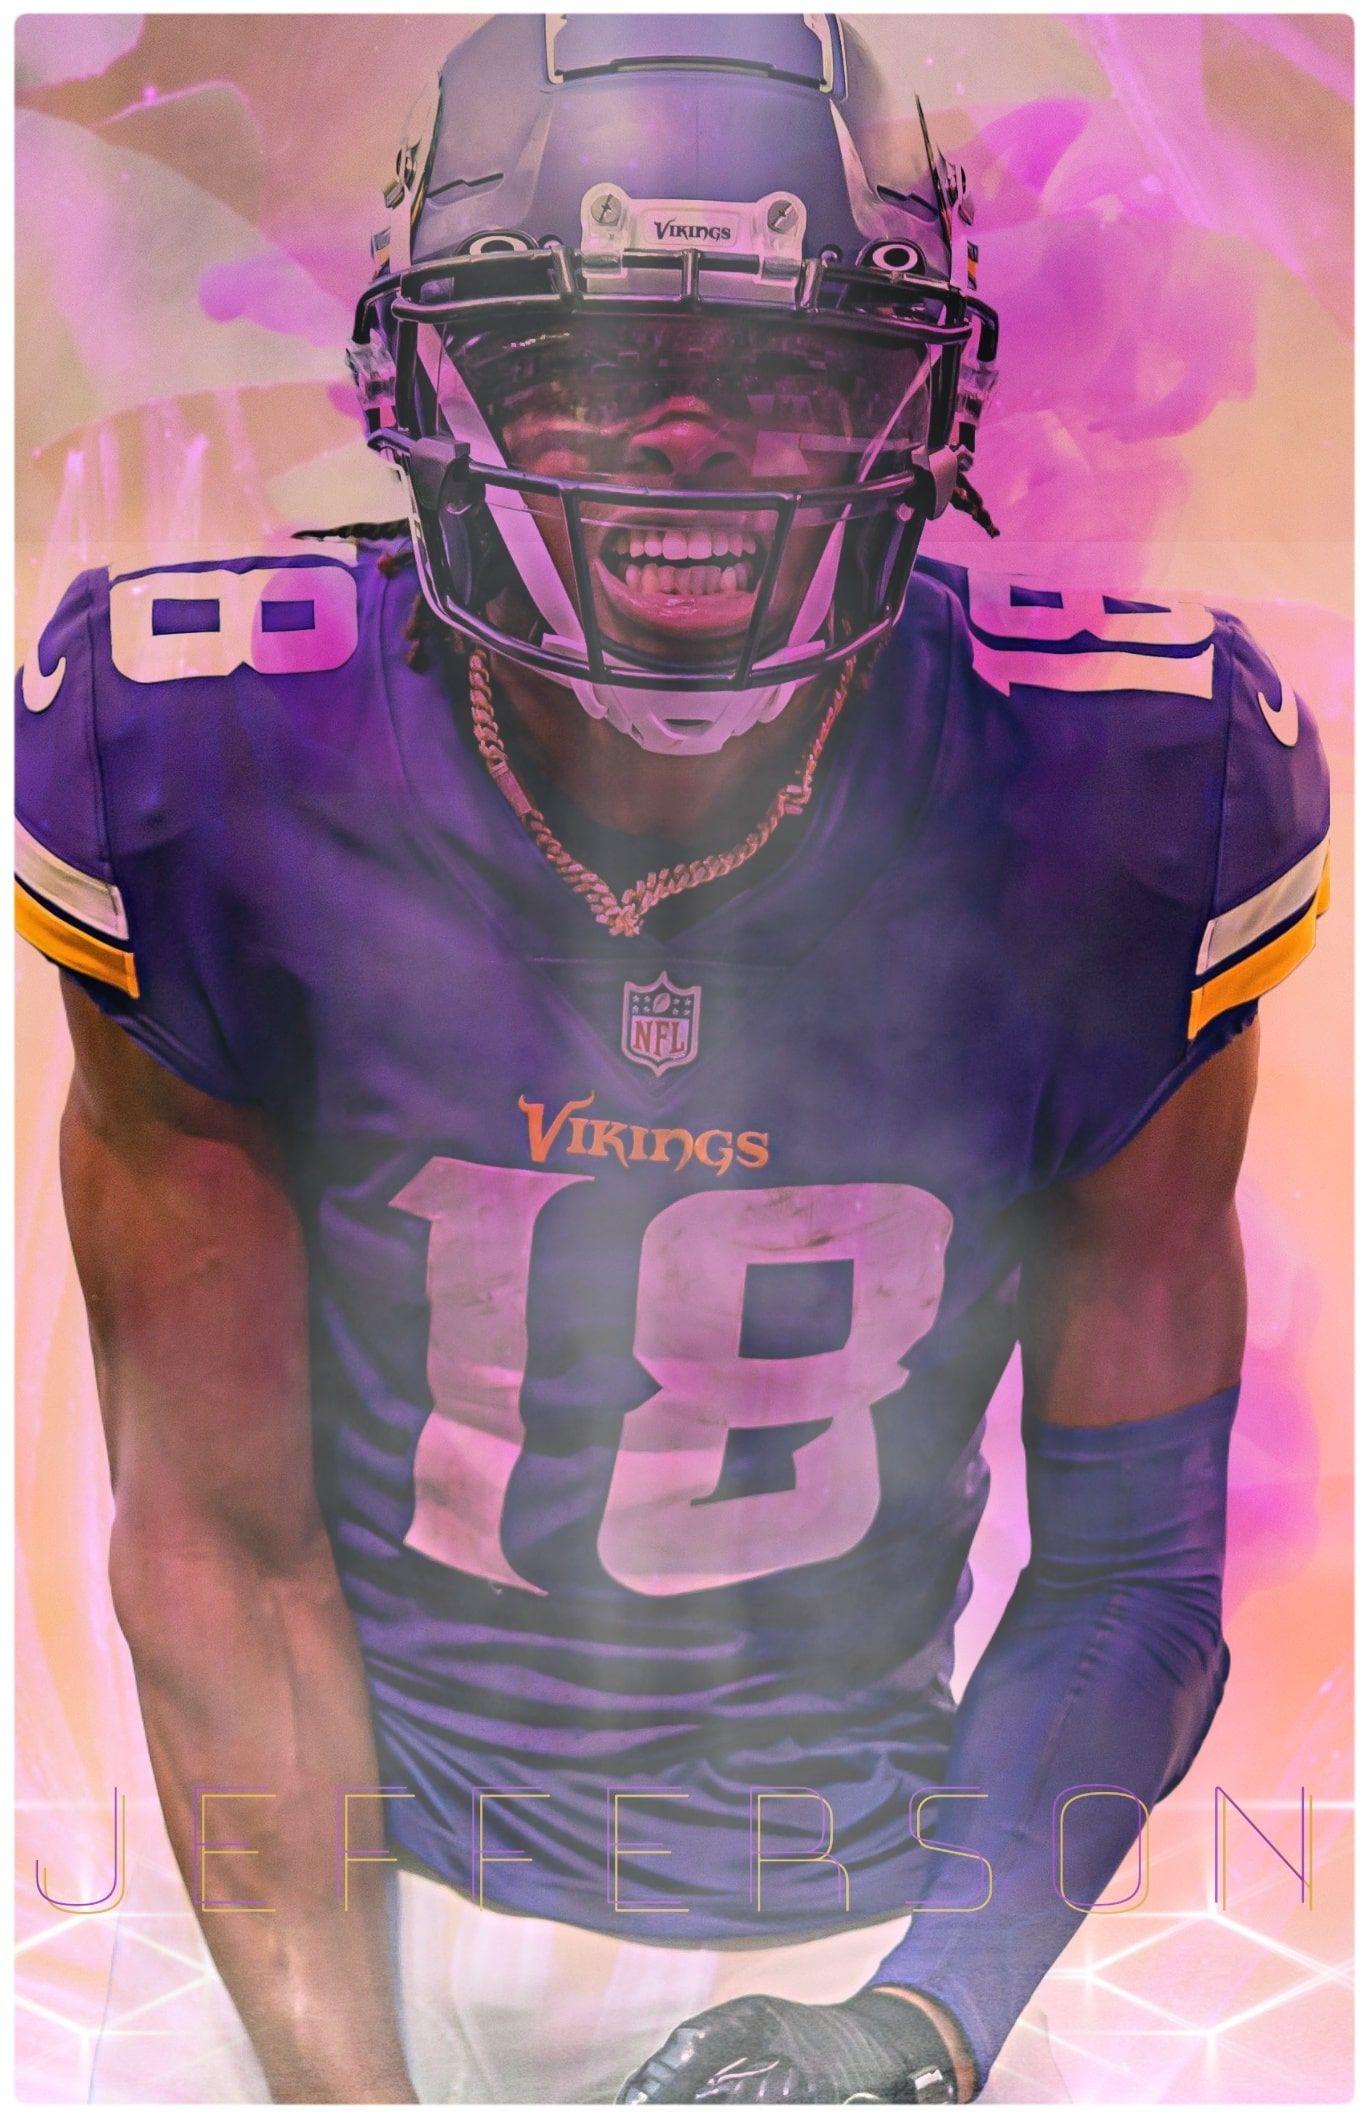 Nick Jones on Twitter  𝗣𝗥𝗘𝗦𝗦 𝗣𝗟𝗔𝗬  Series  No 14 First  piece in a crossover series featuring NFL WRs and streaming networks  Justin  Jefferson x HBO Max  Personal